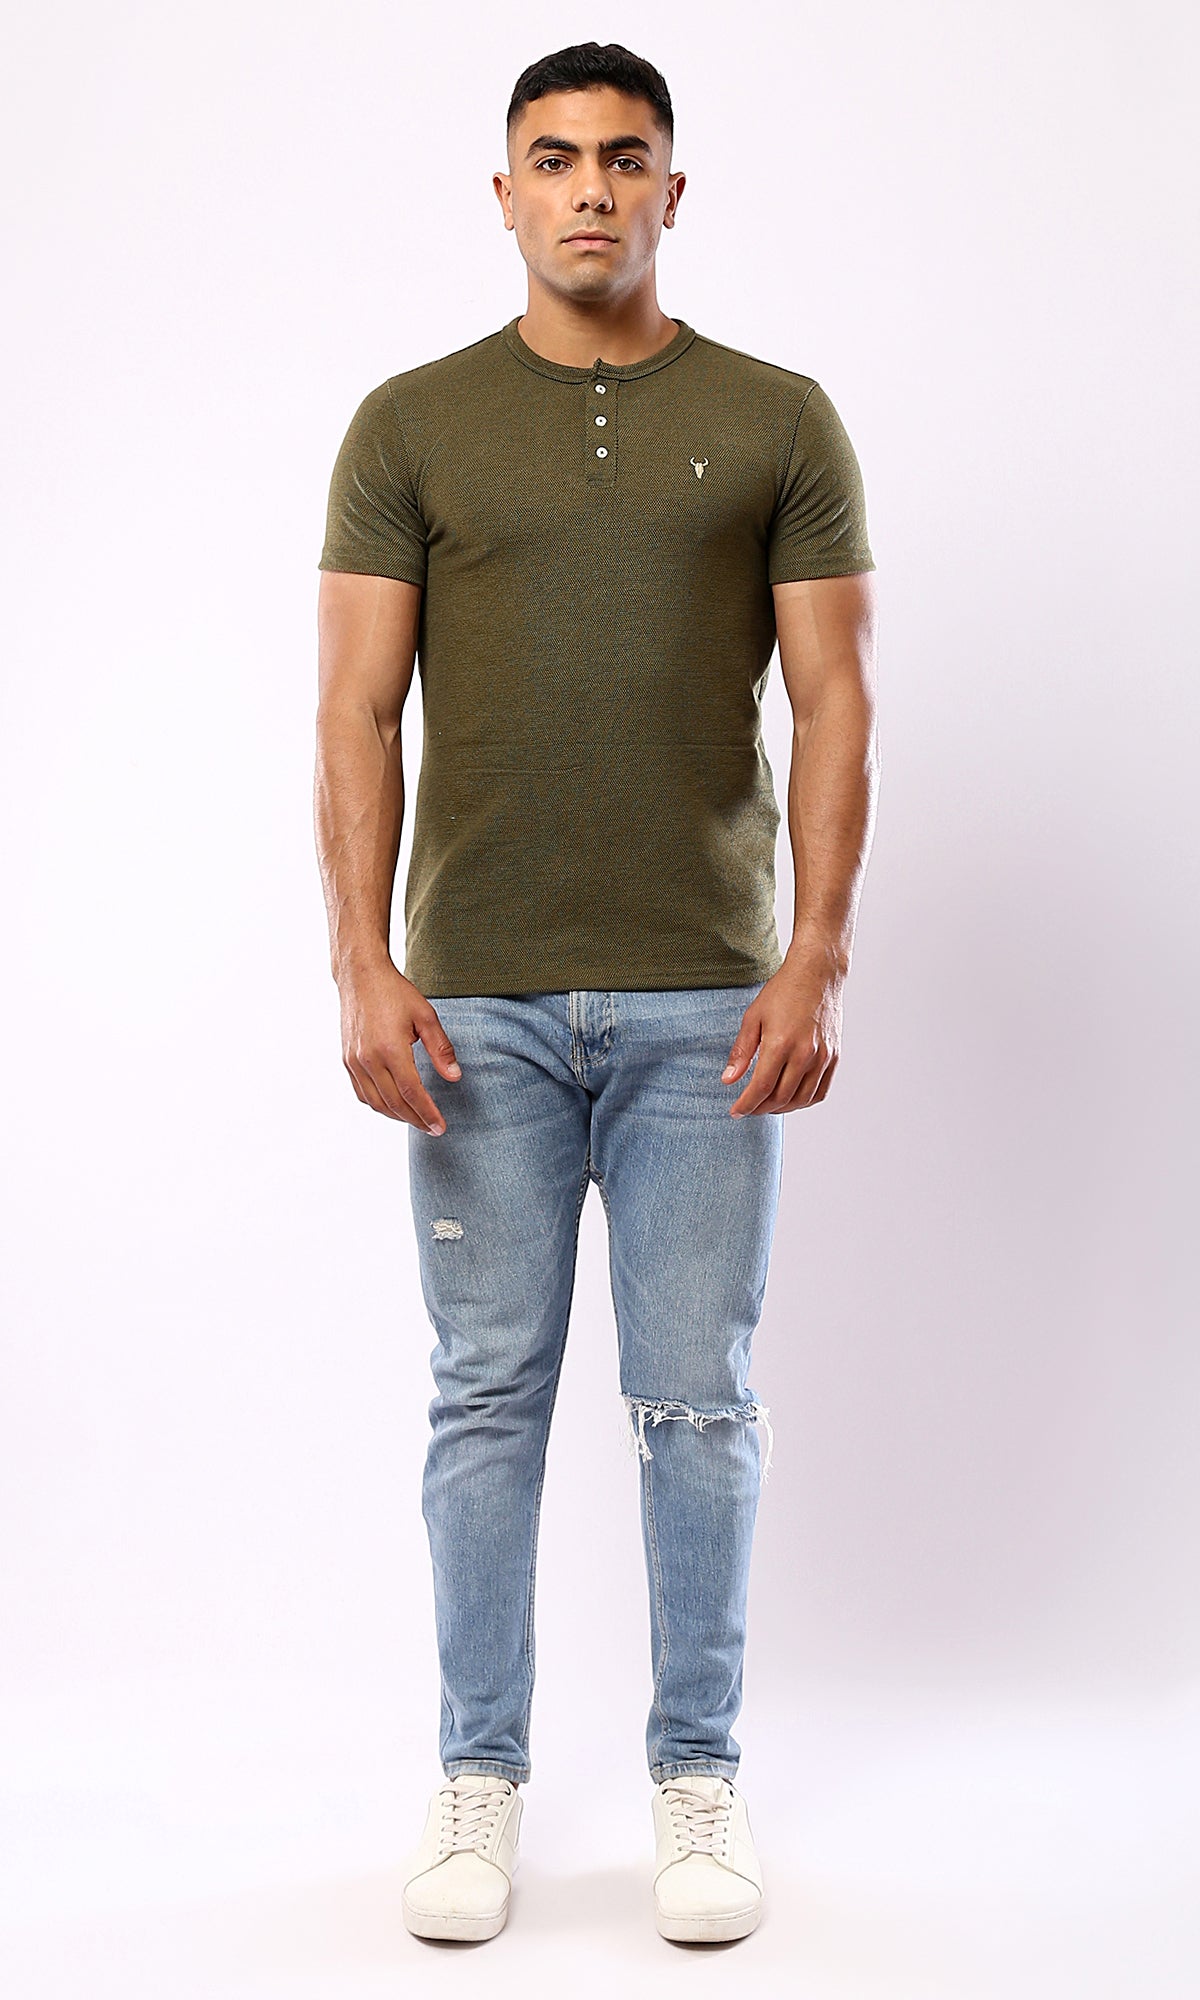 O181701 Round Neck With Buttons Heather Olive Henley Shirt